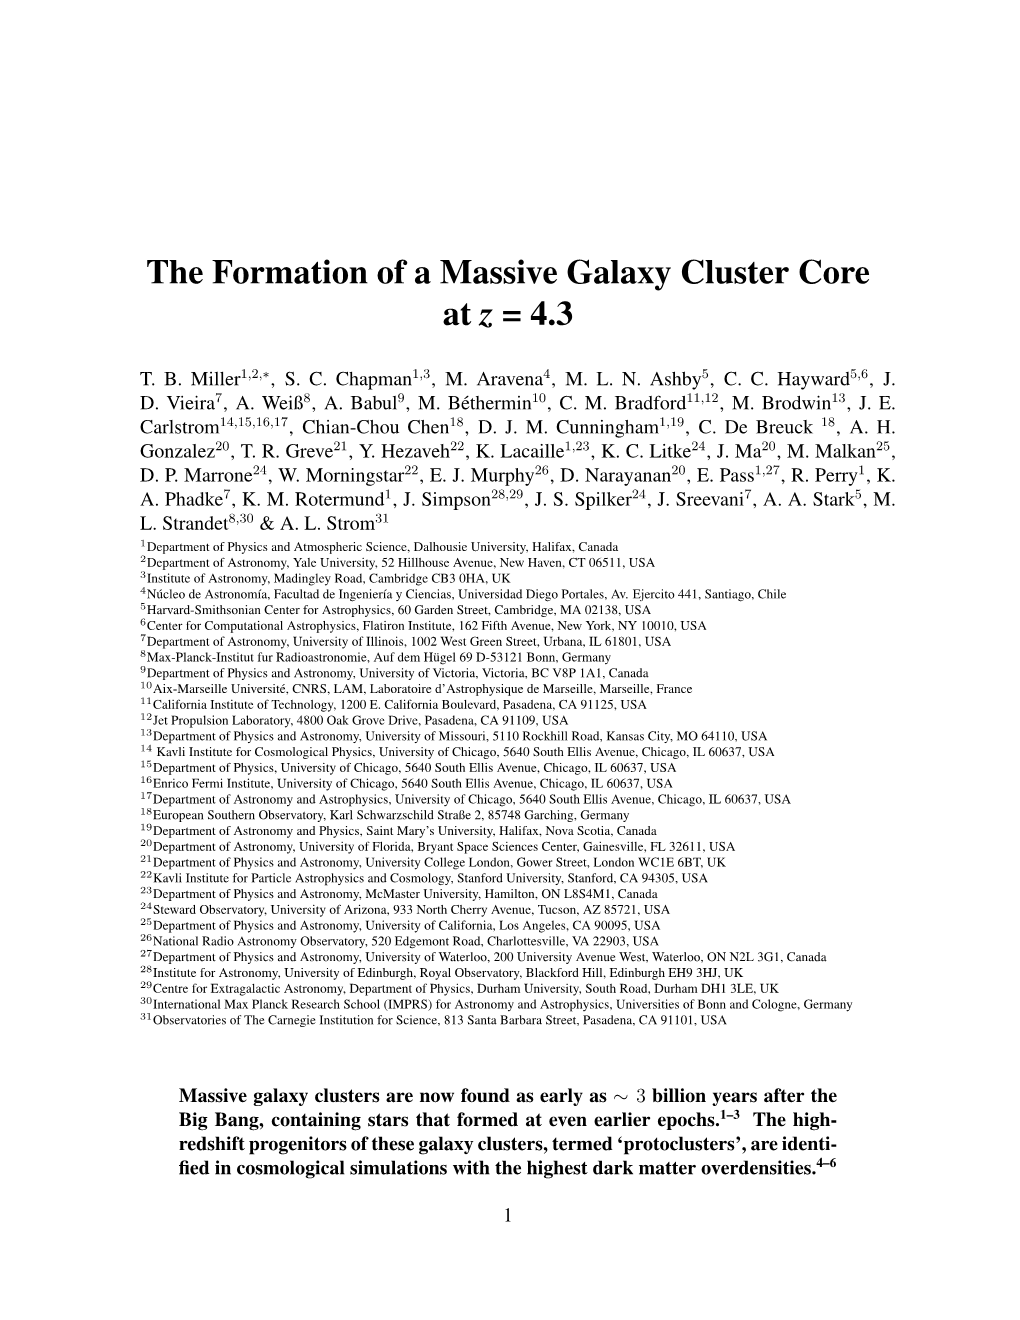 The Formation of a Massive Galaxy Cluster Core at Z = 4.3